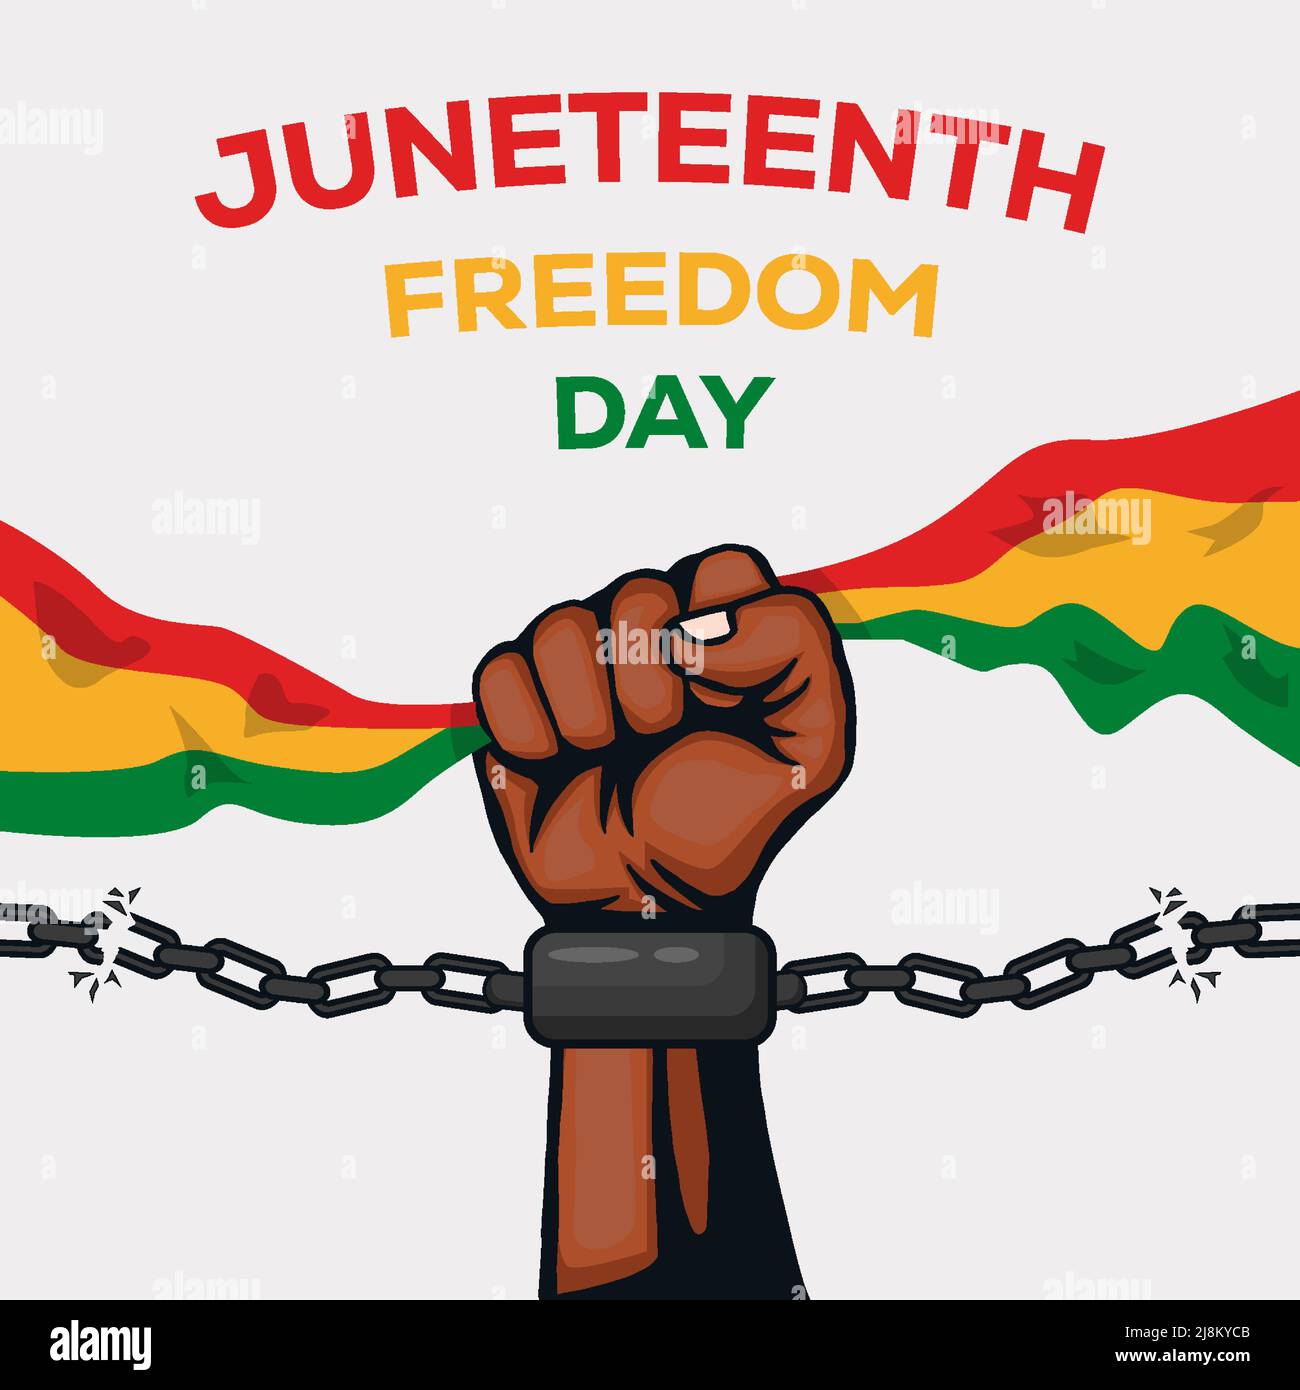 juneteenth design background illustration with strong fist hand breaks ...